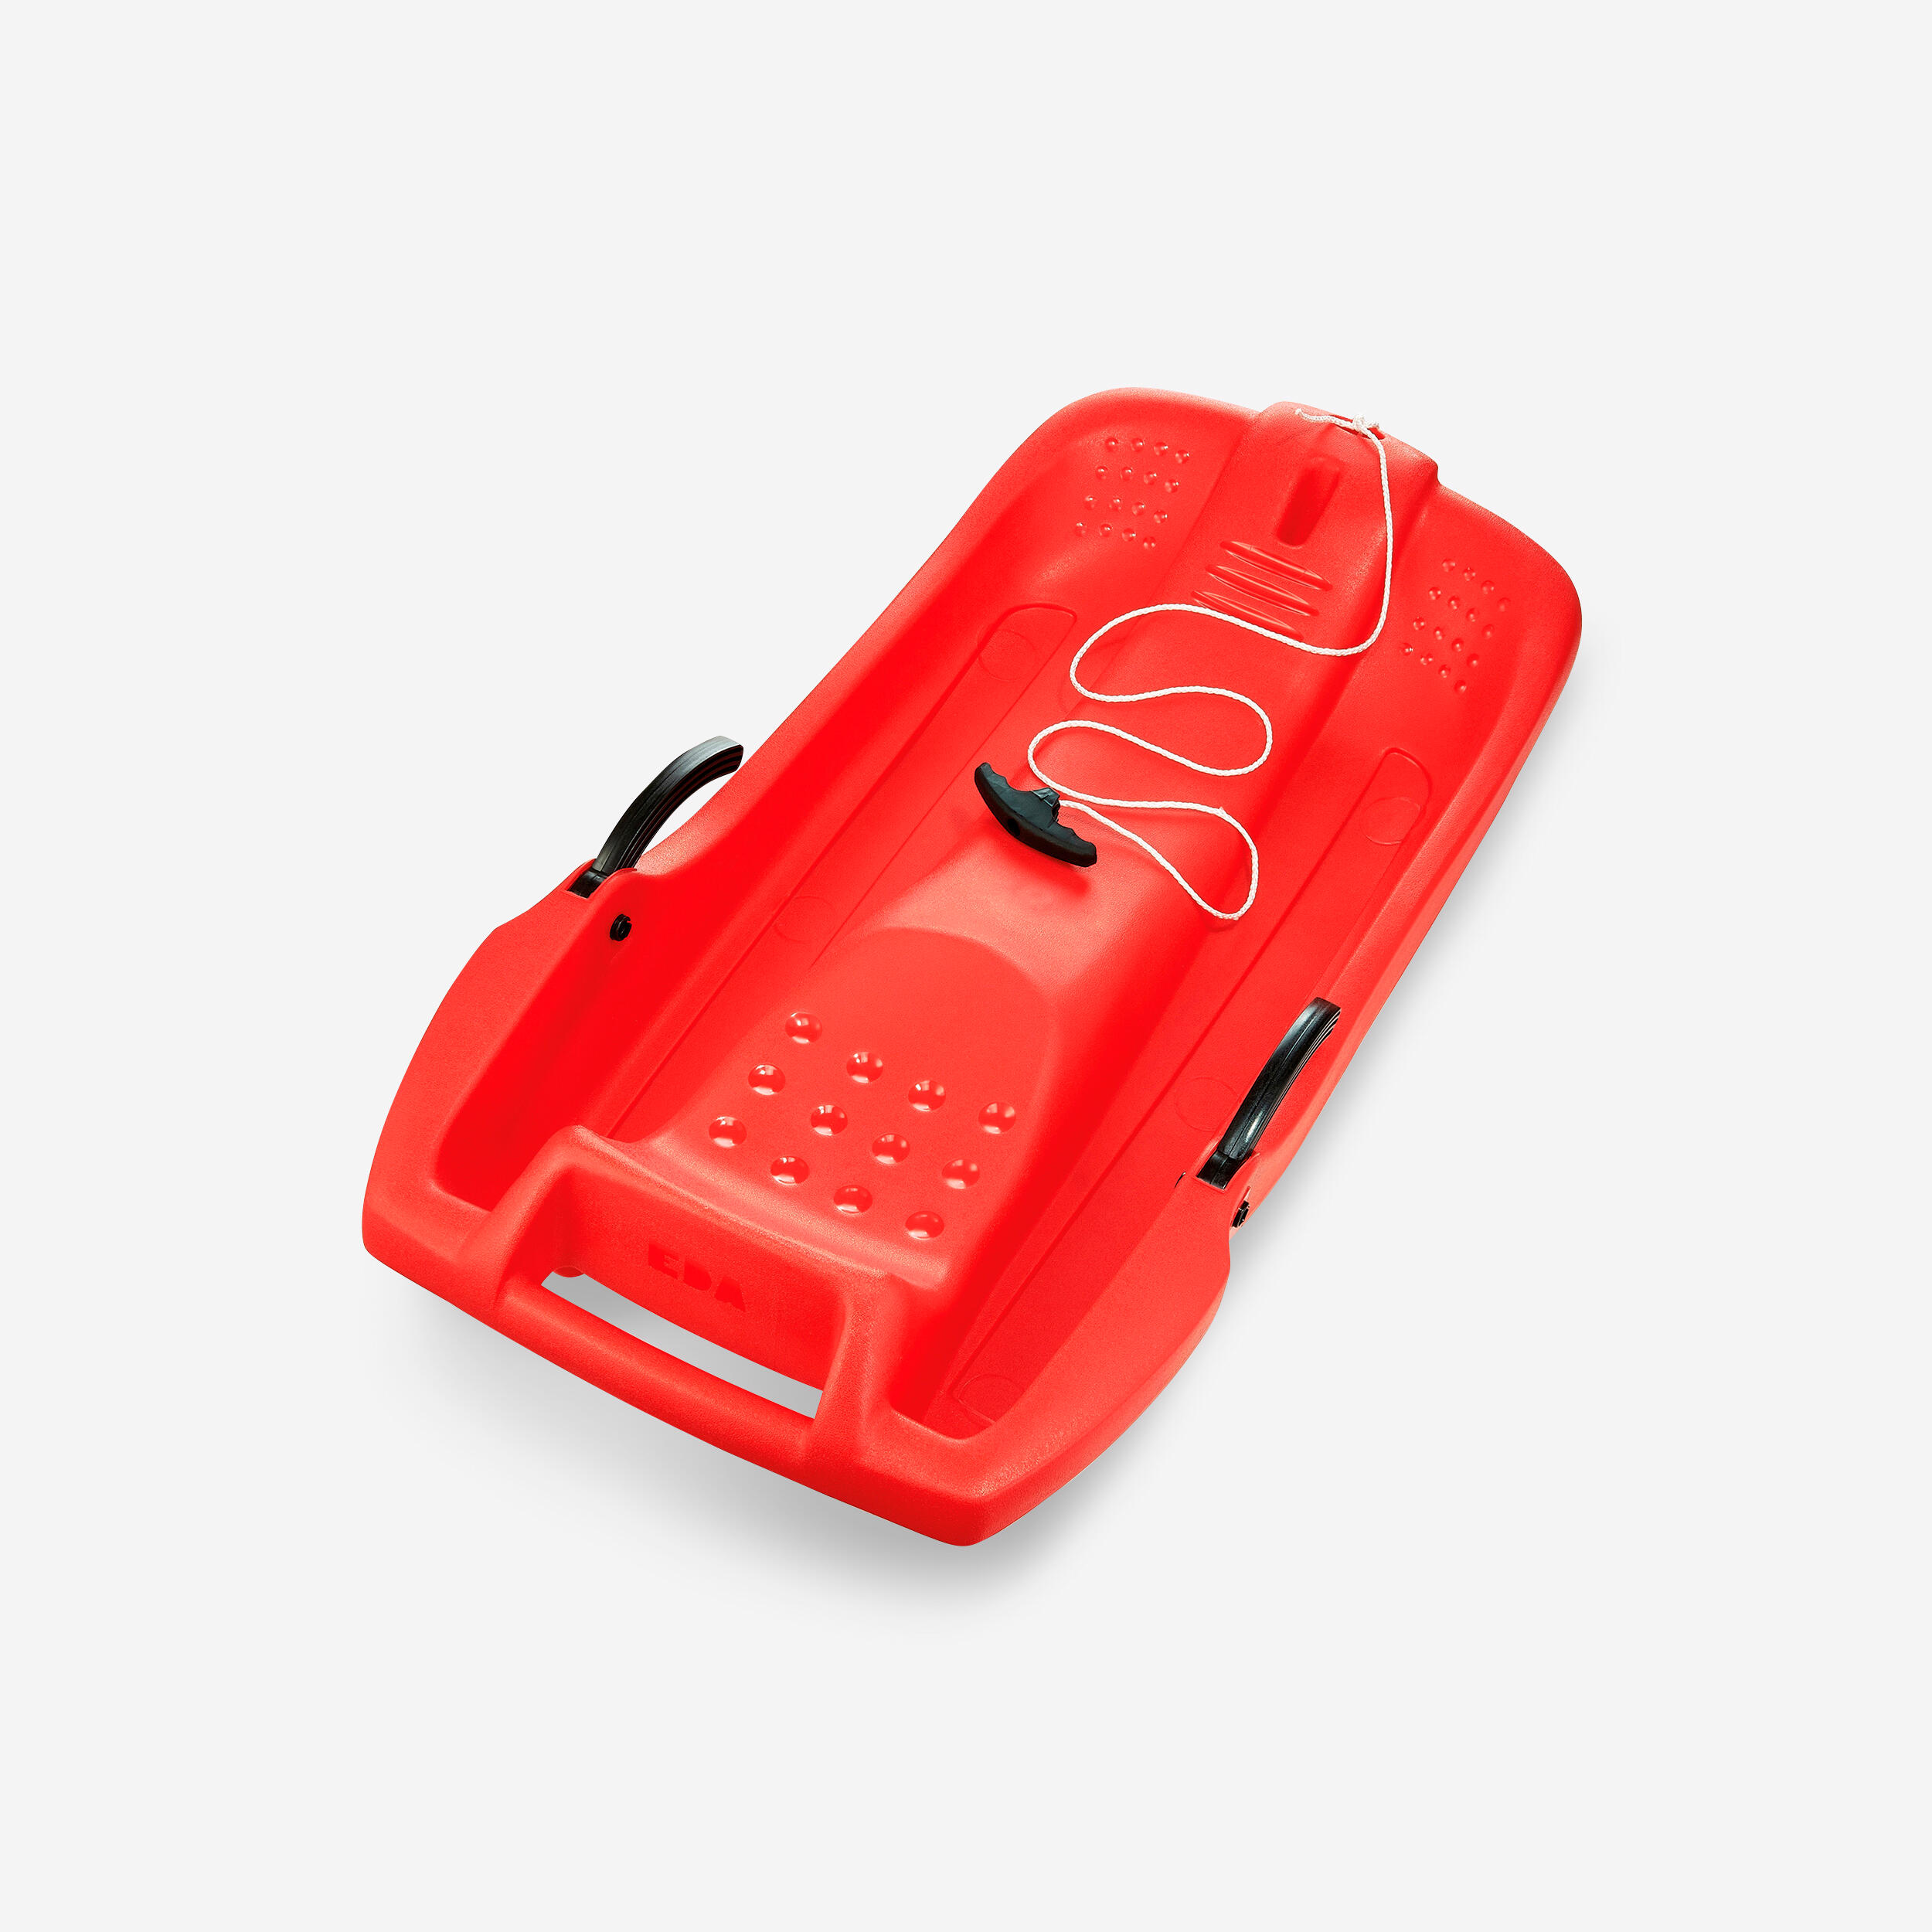 Kids' Tray Sledge with Brakes - Red EDA 